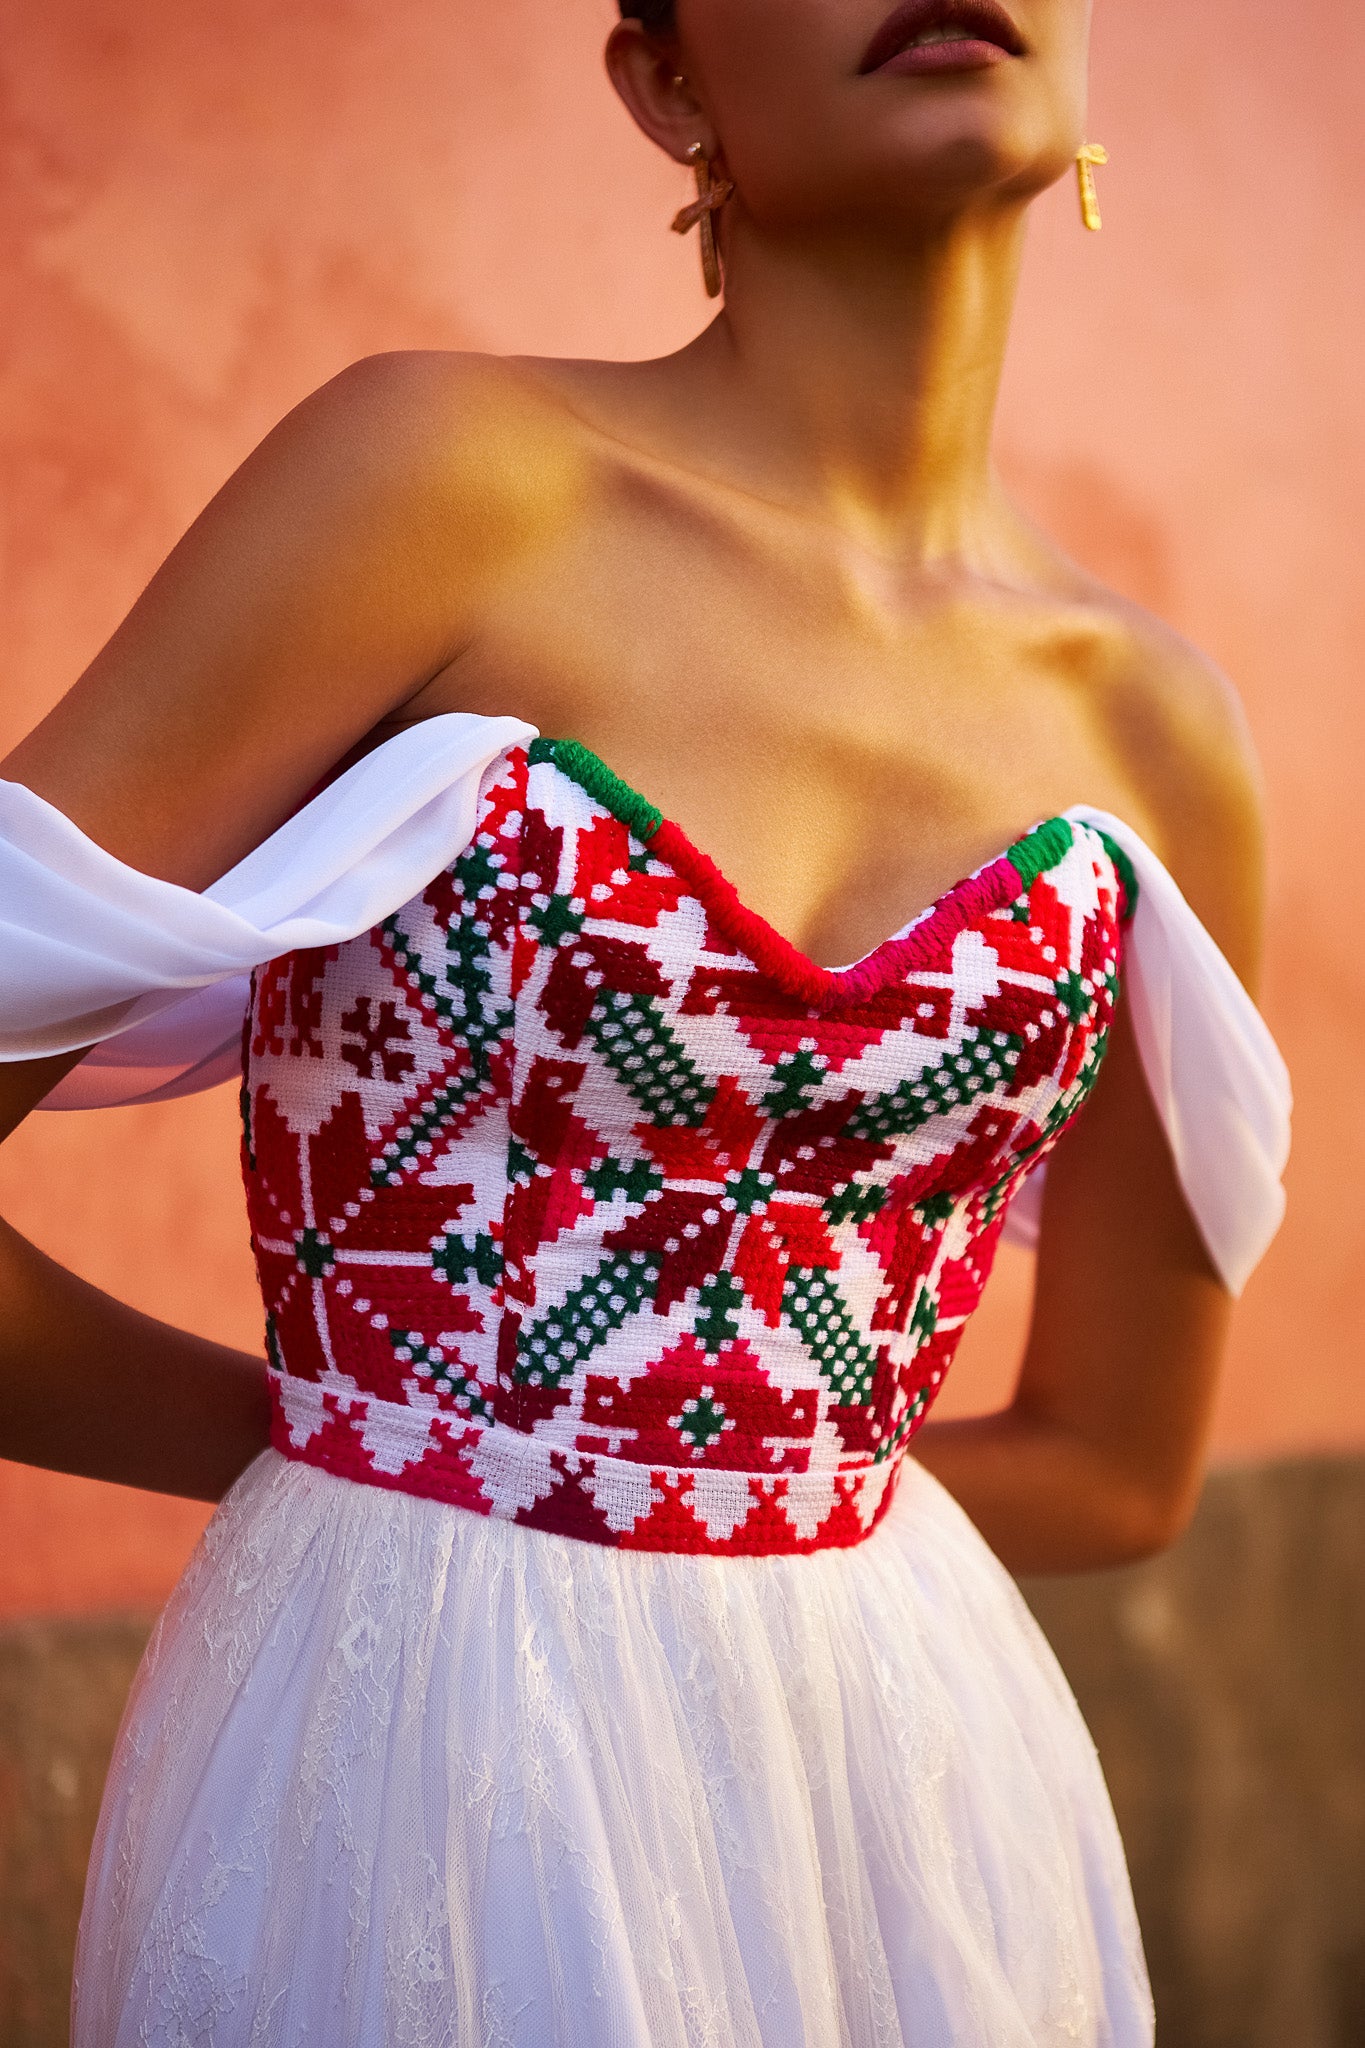 mexican embroidered wedding dress